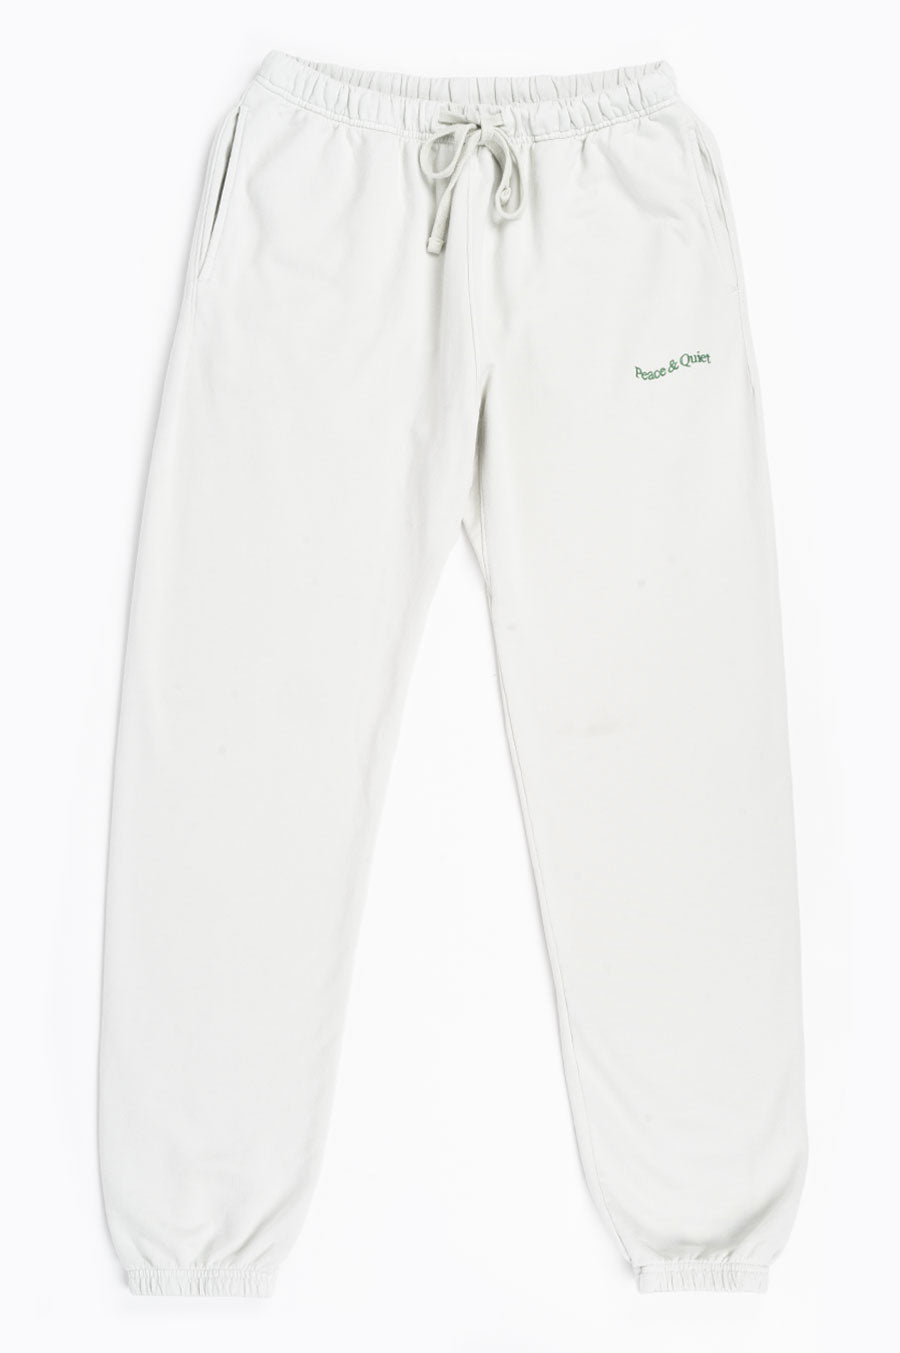 THE MUSEUM OF PEACE AND QUIET MICRO WORDMARK SWEATPANT HEATHER